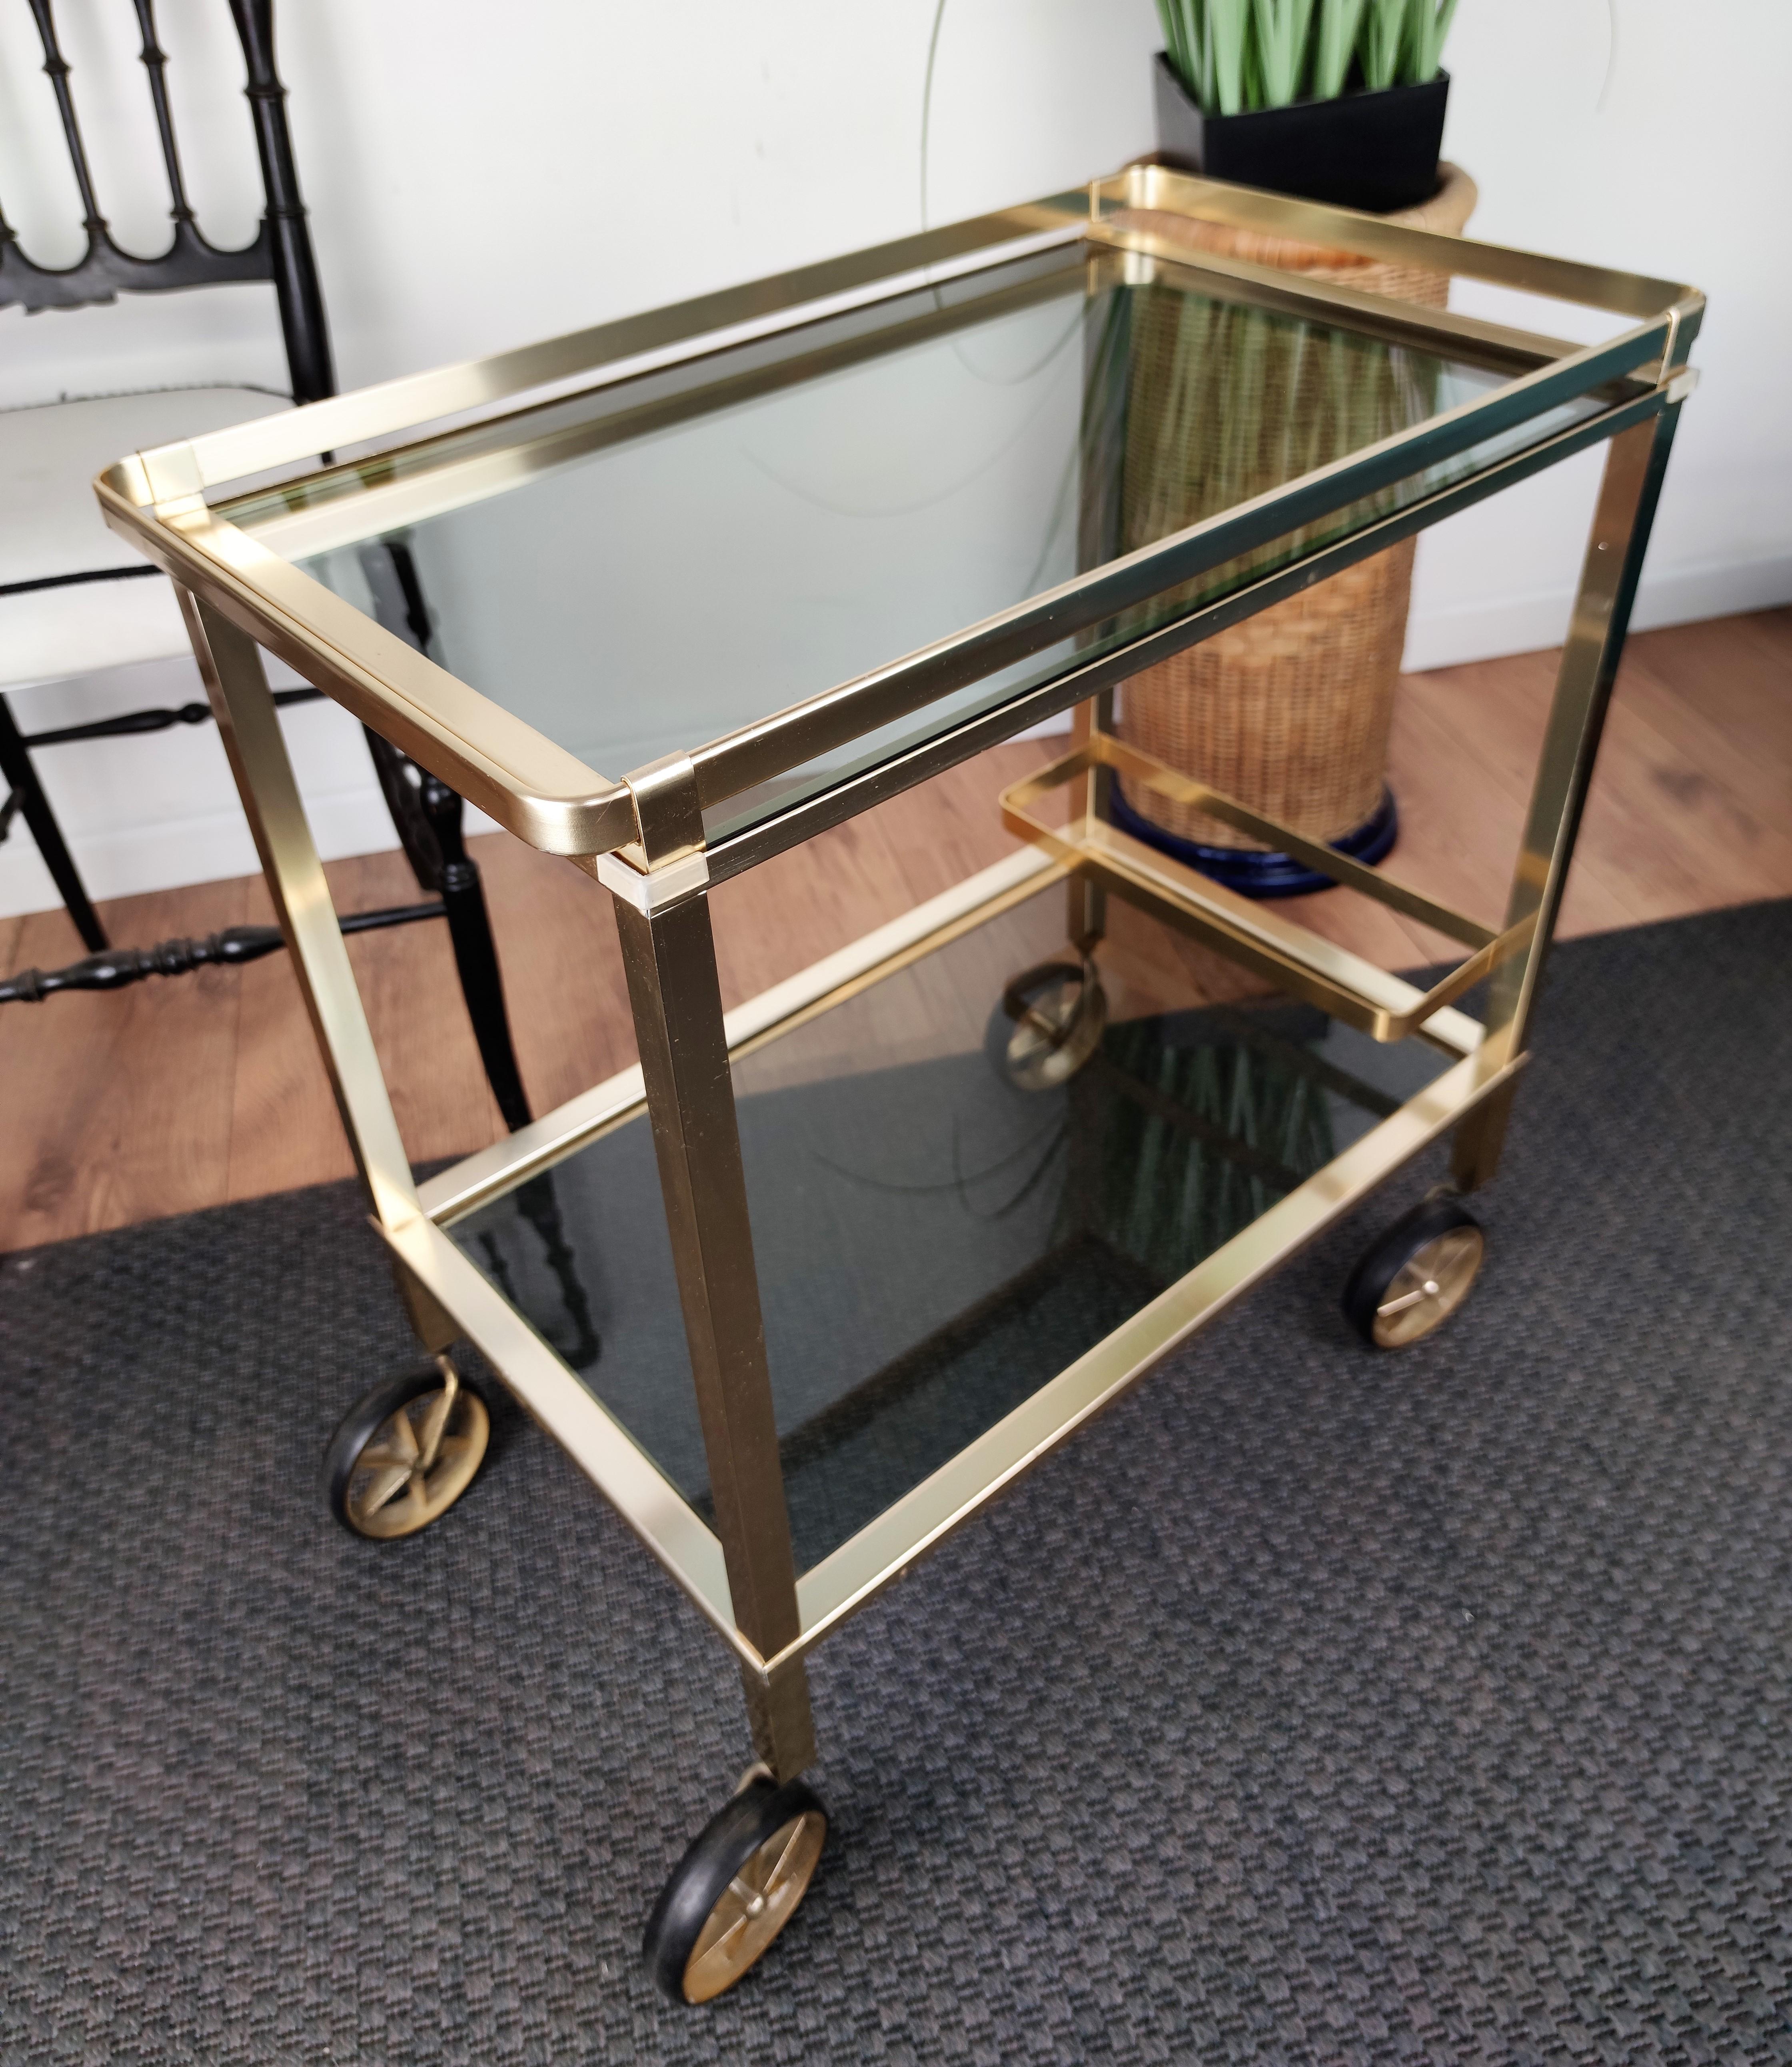 20th Century Two-Tier Brass and Glass Bar Cart with Removable Top Tray, Italy, 1970s